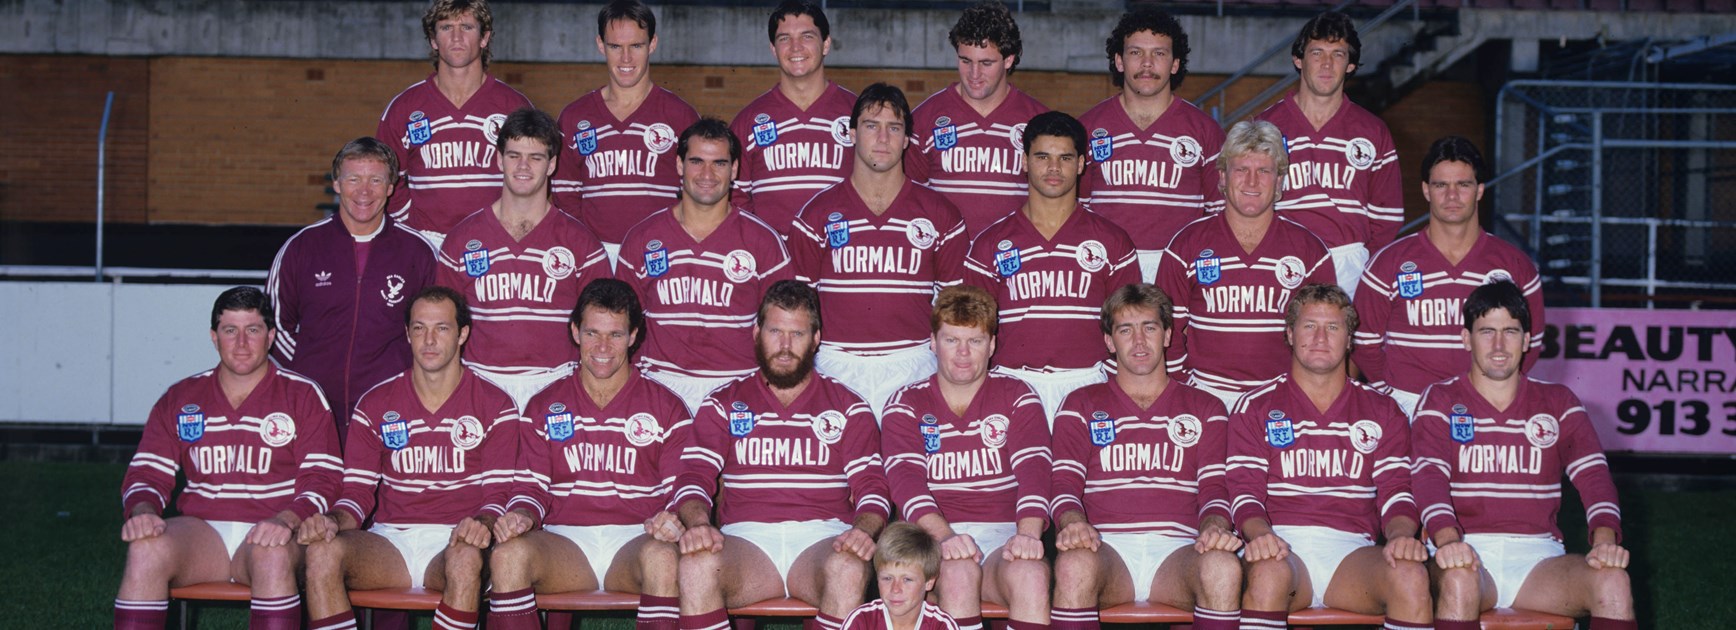 The 1987 Sea Eagles who beat the Roosters in the playoffs before toppling Canberra in the grand final.